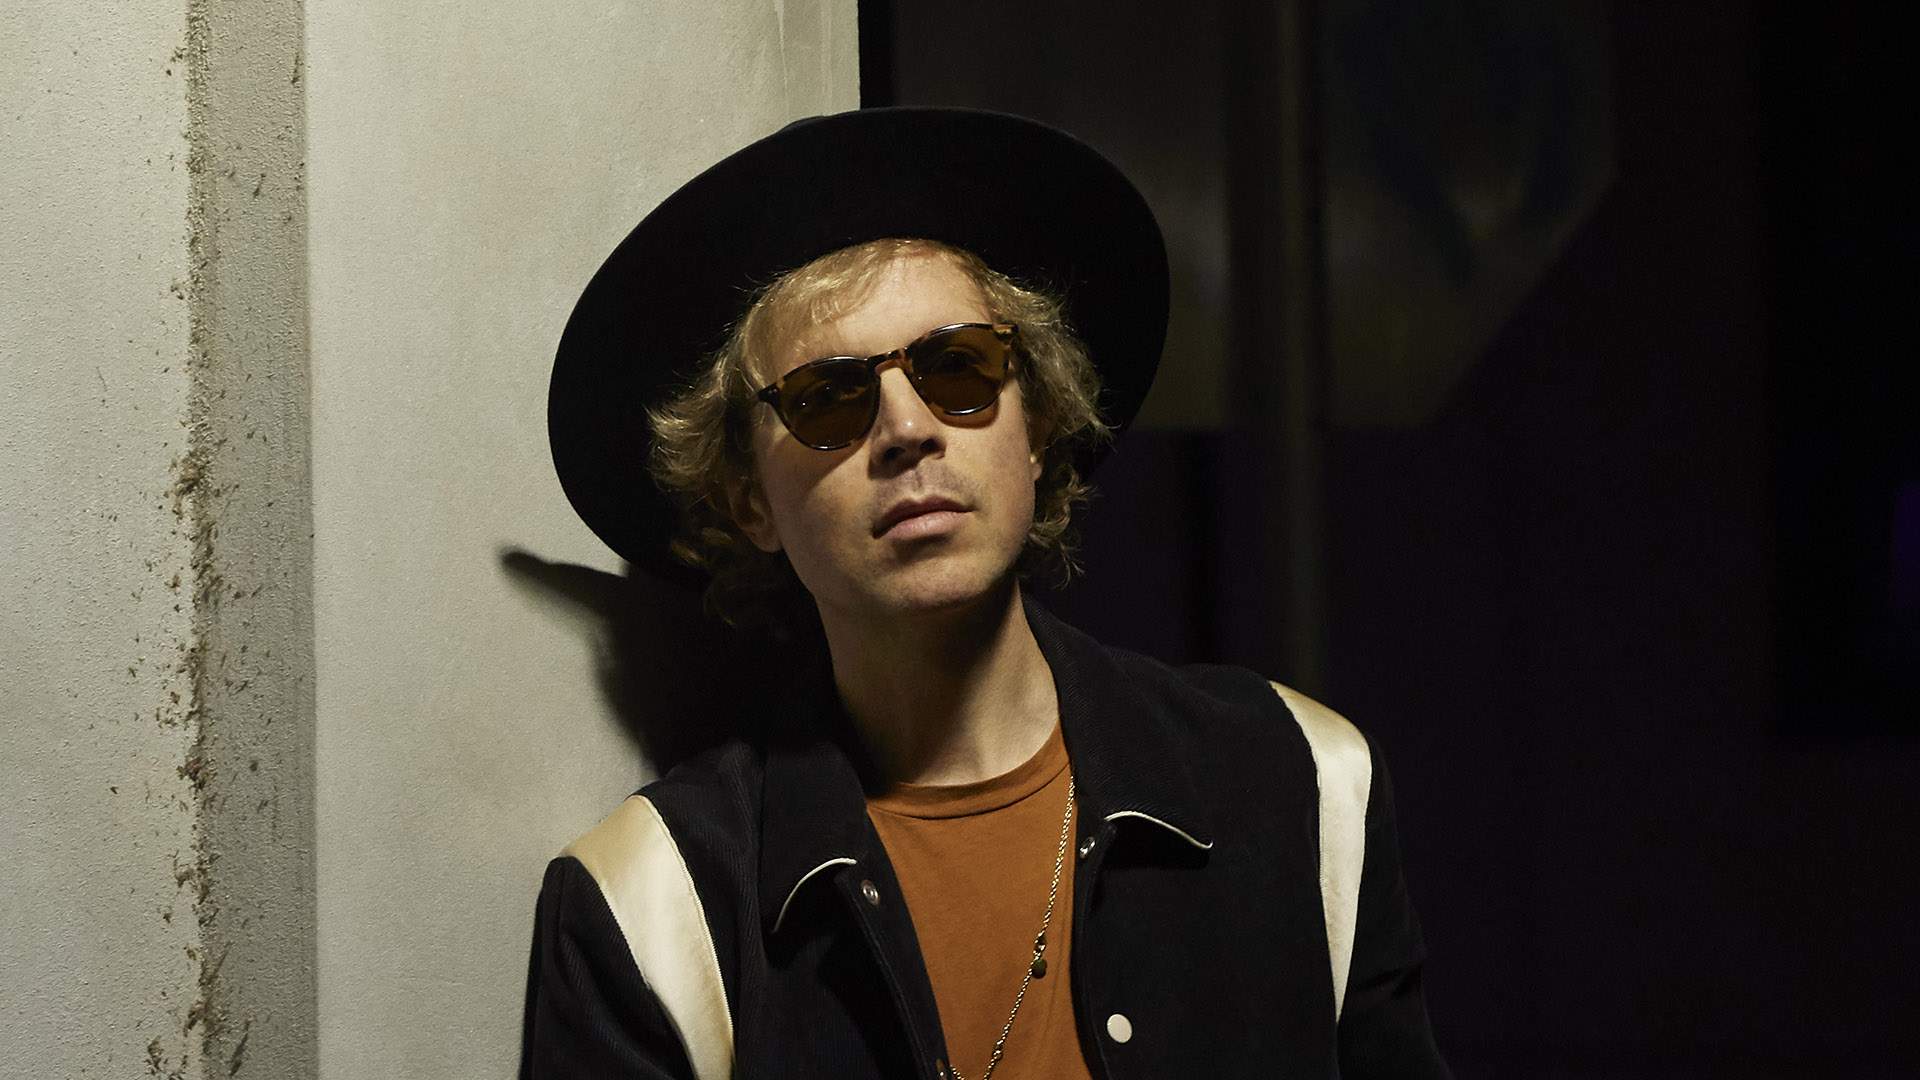 A profile image of Beck for his lineup appearance at Harvest Rock.